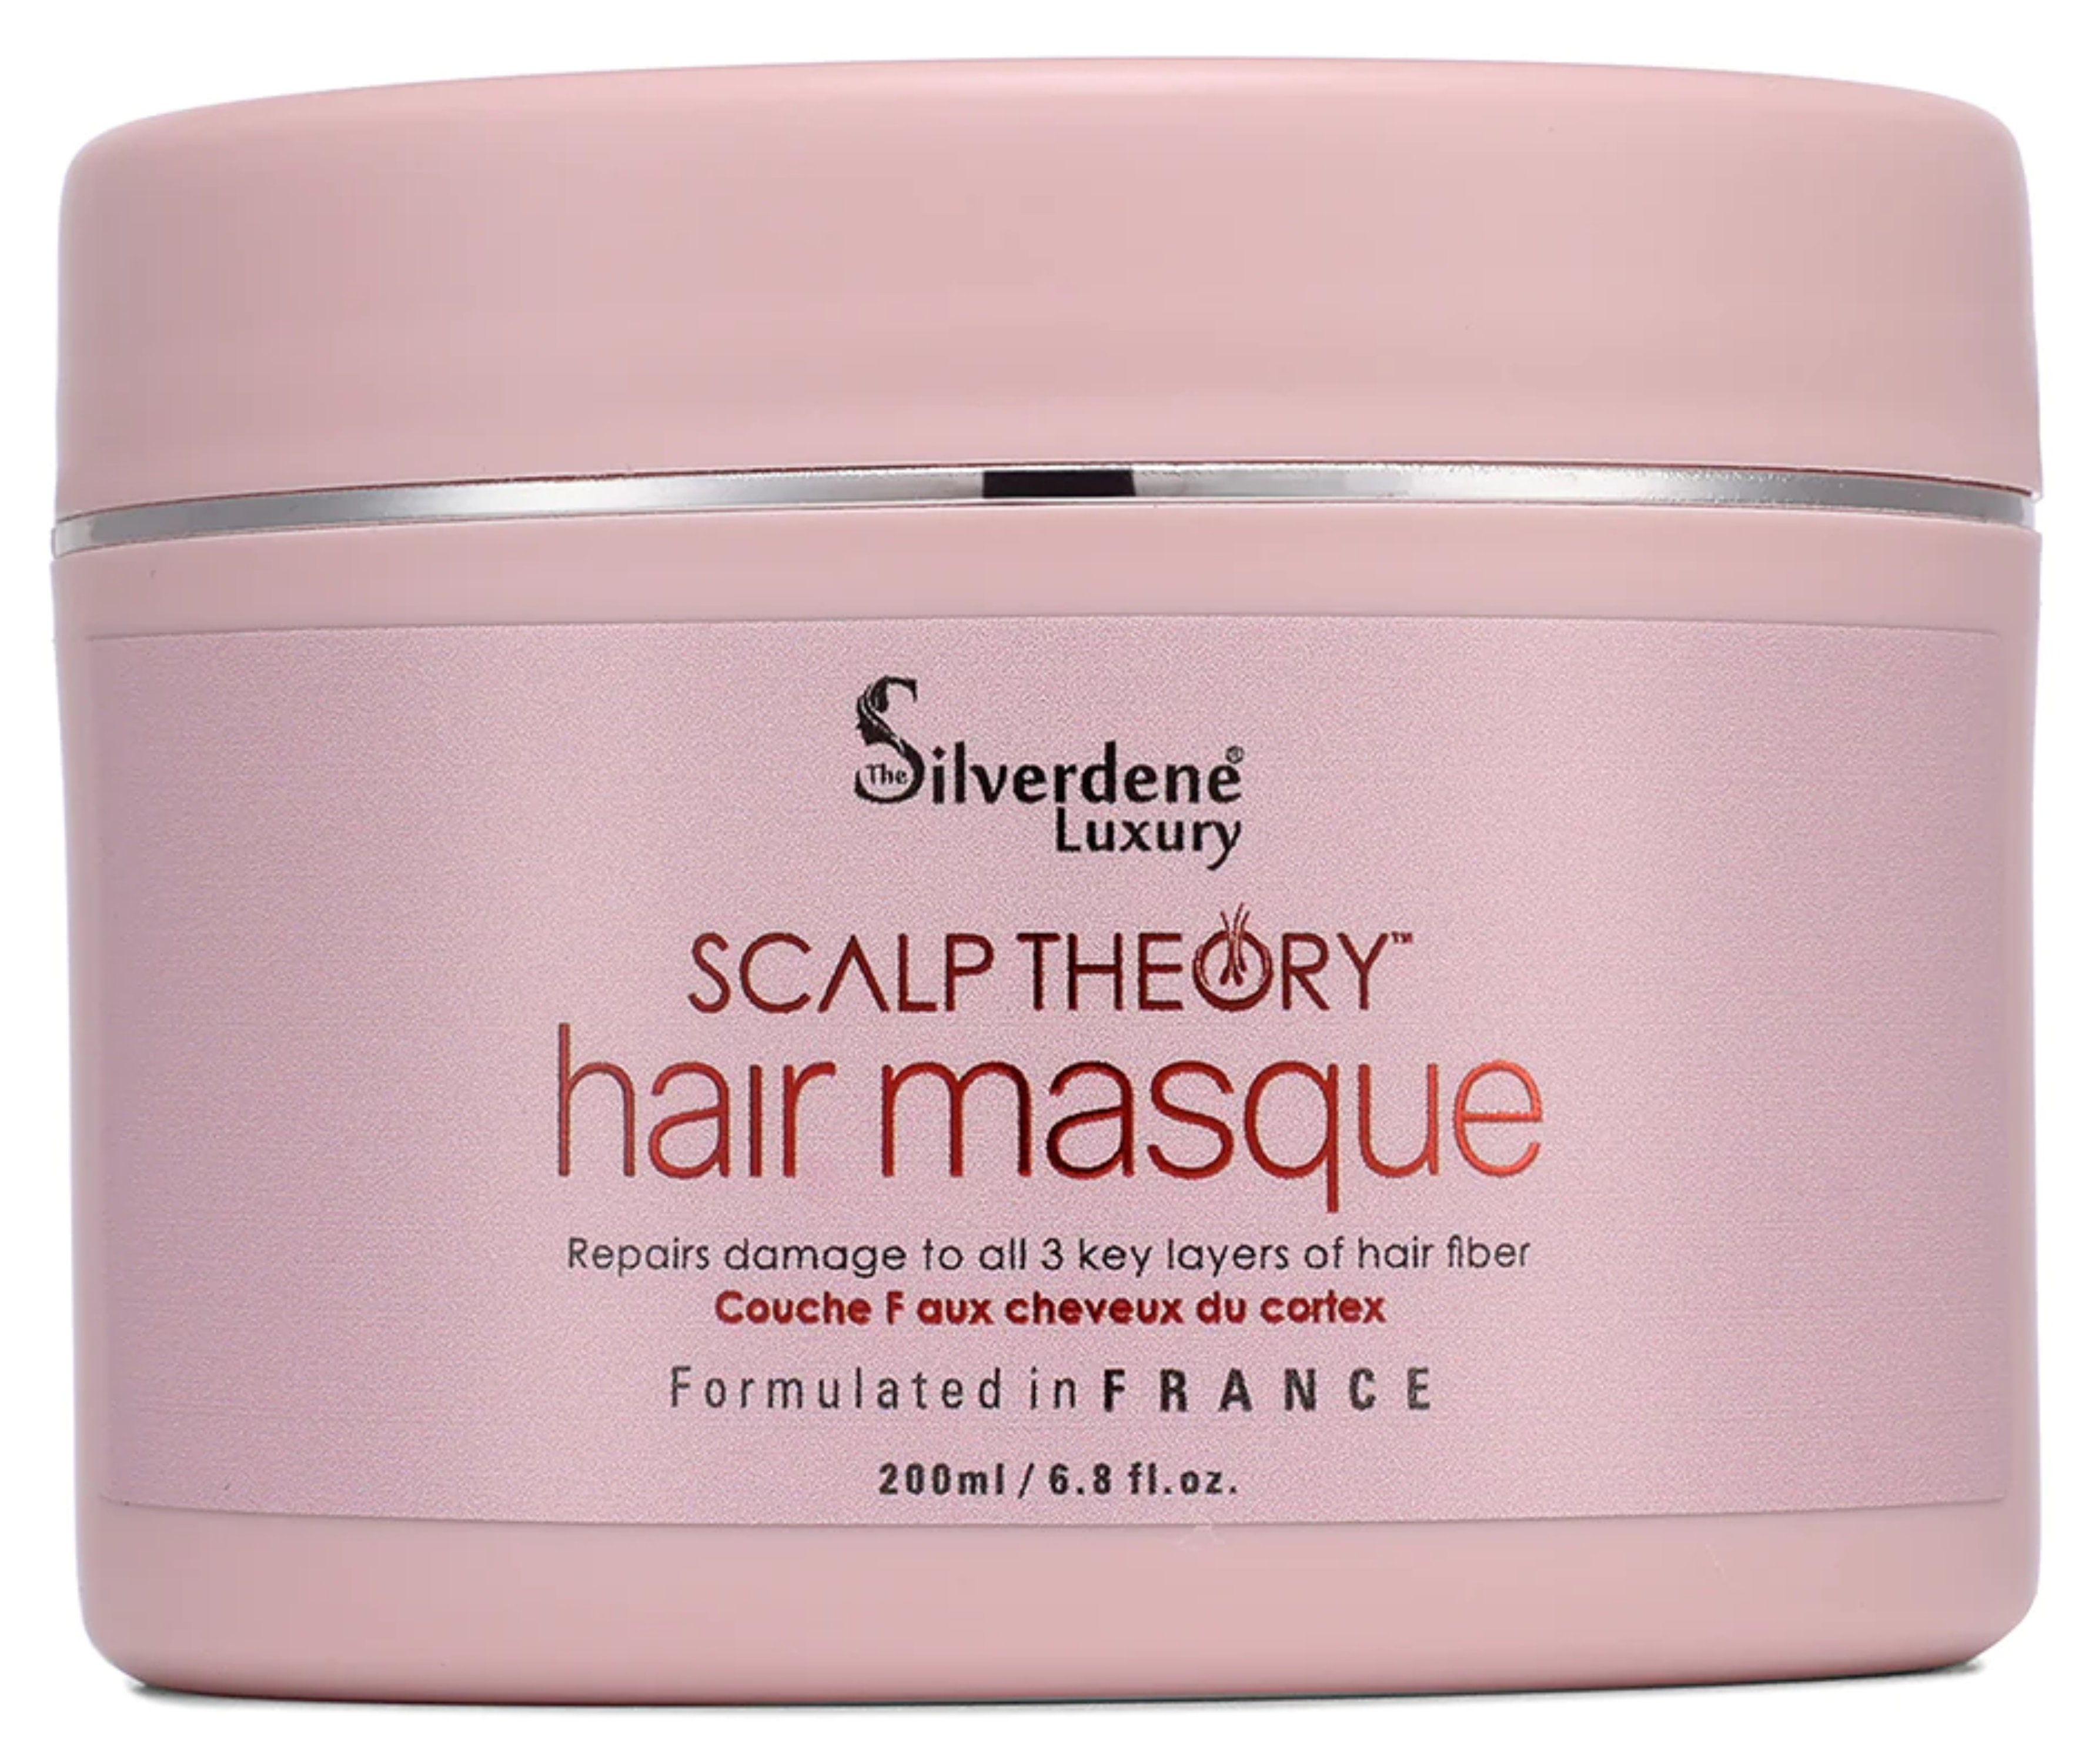 Say Goodbye to Scalp Dandruff: The Power of our Hair Shampoo and Masque